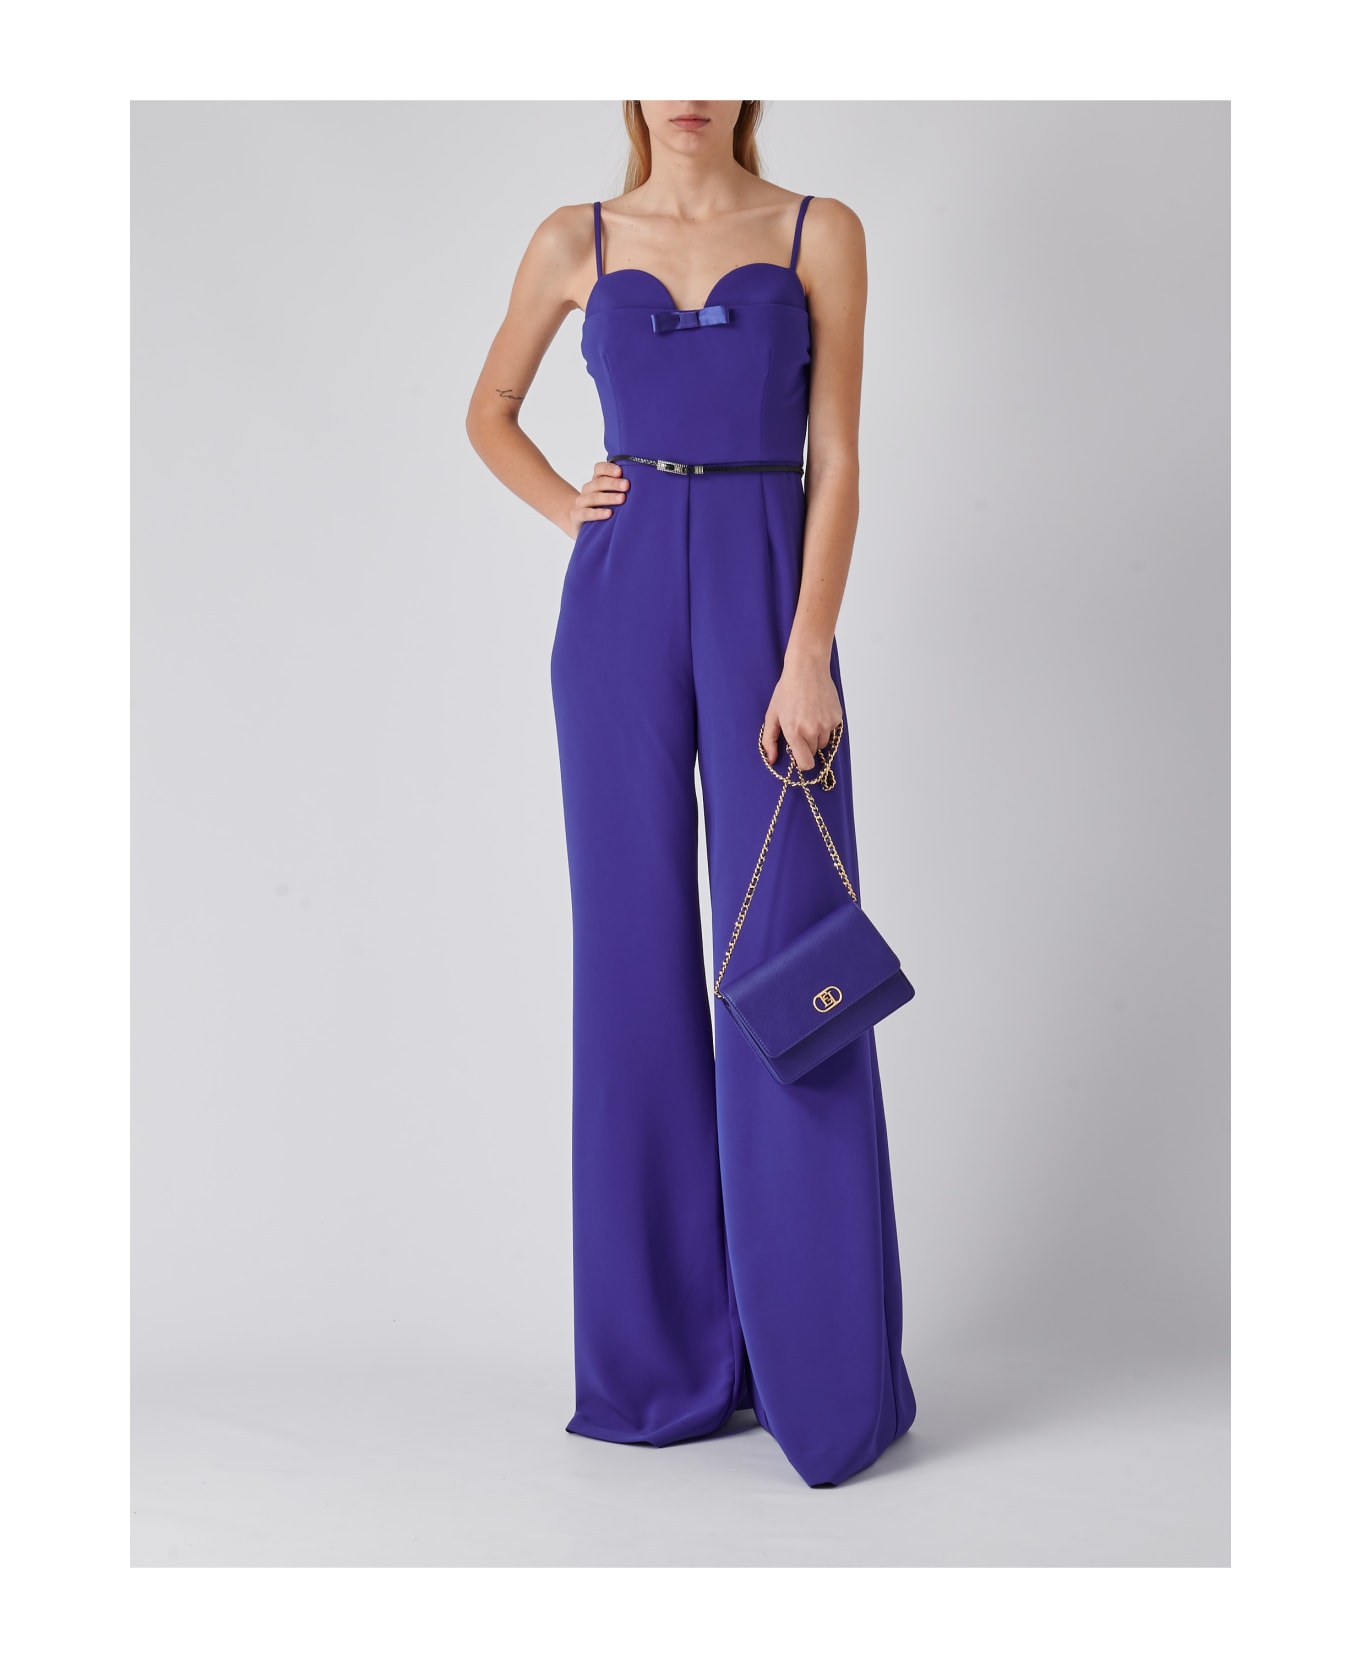 Elisabetta Franchi Poliester Jump Suit - INDACO ボトムス